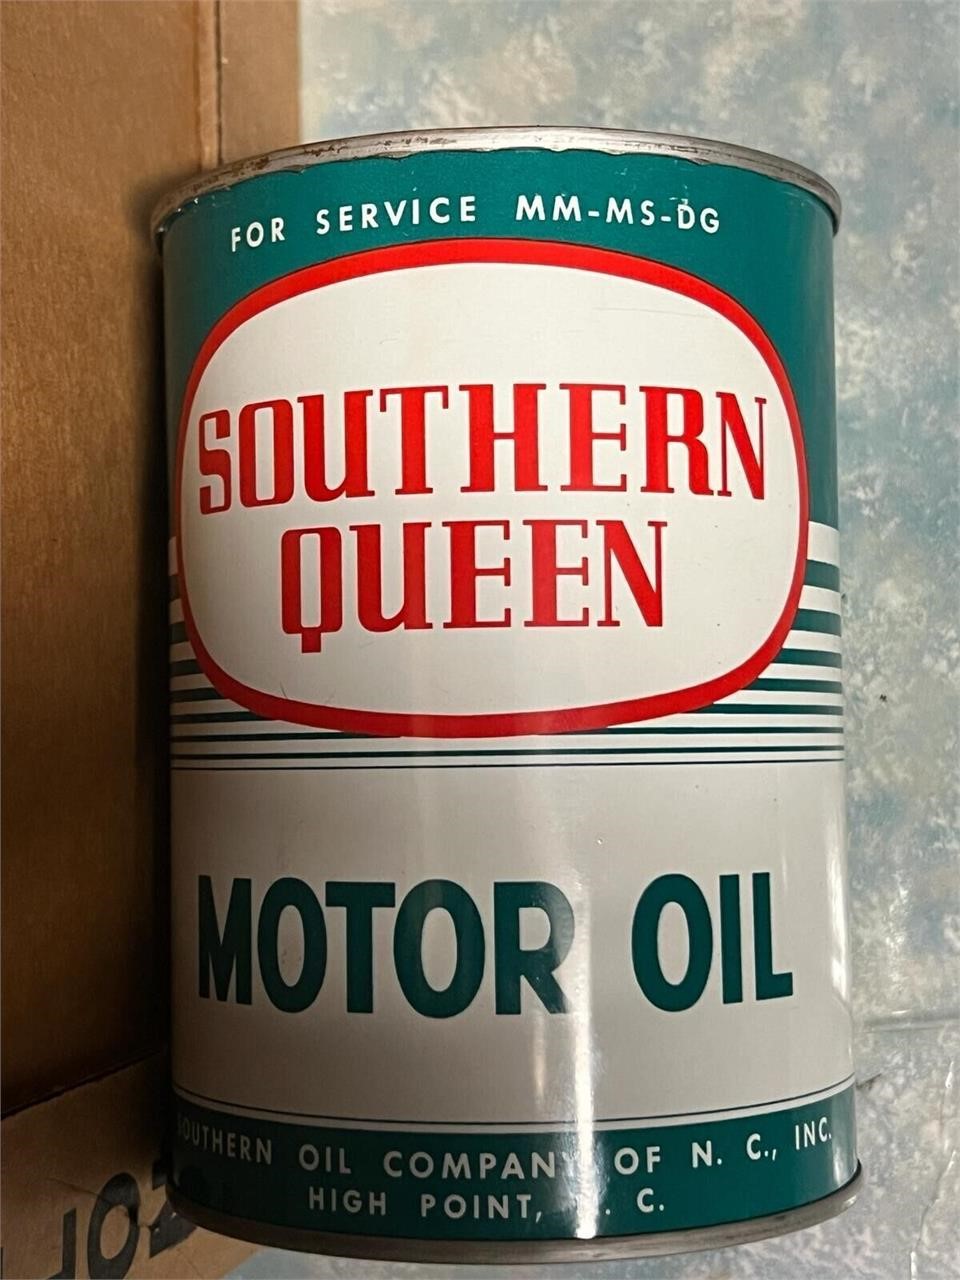 VINTAGE   1960’s SOUTHERN QUEEN Motor Oil Can